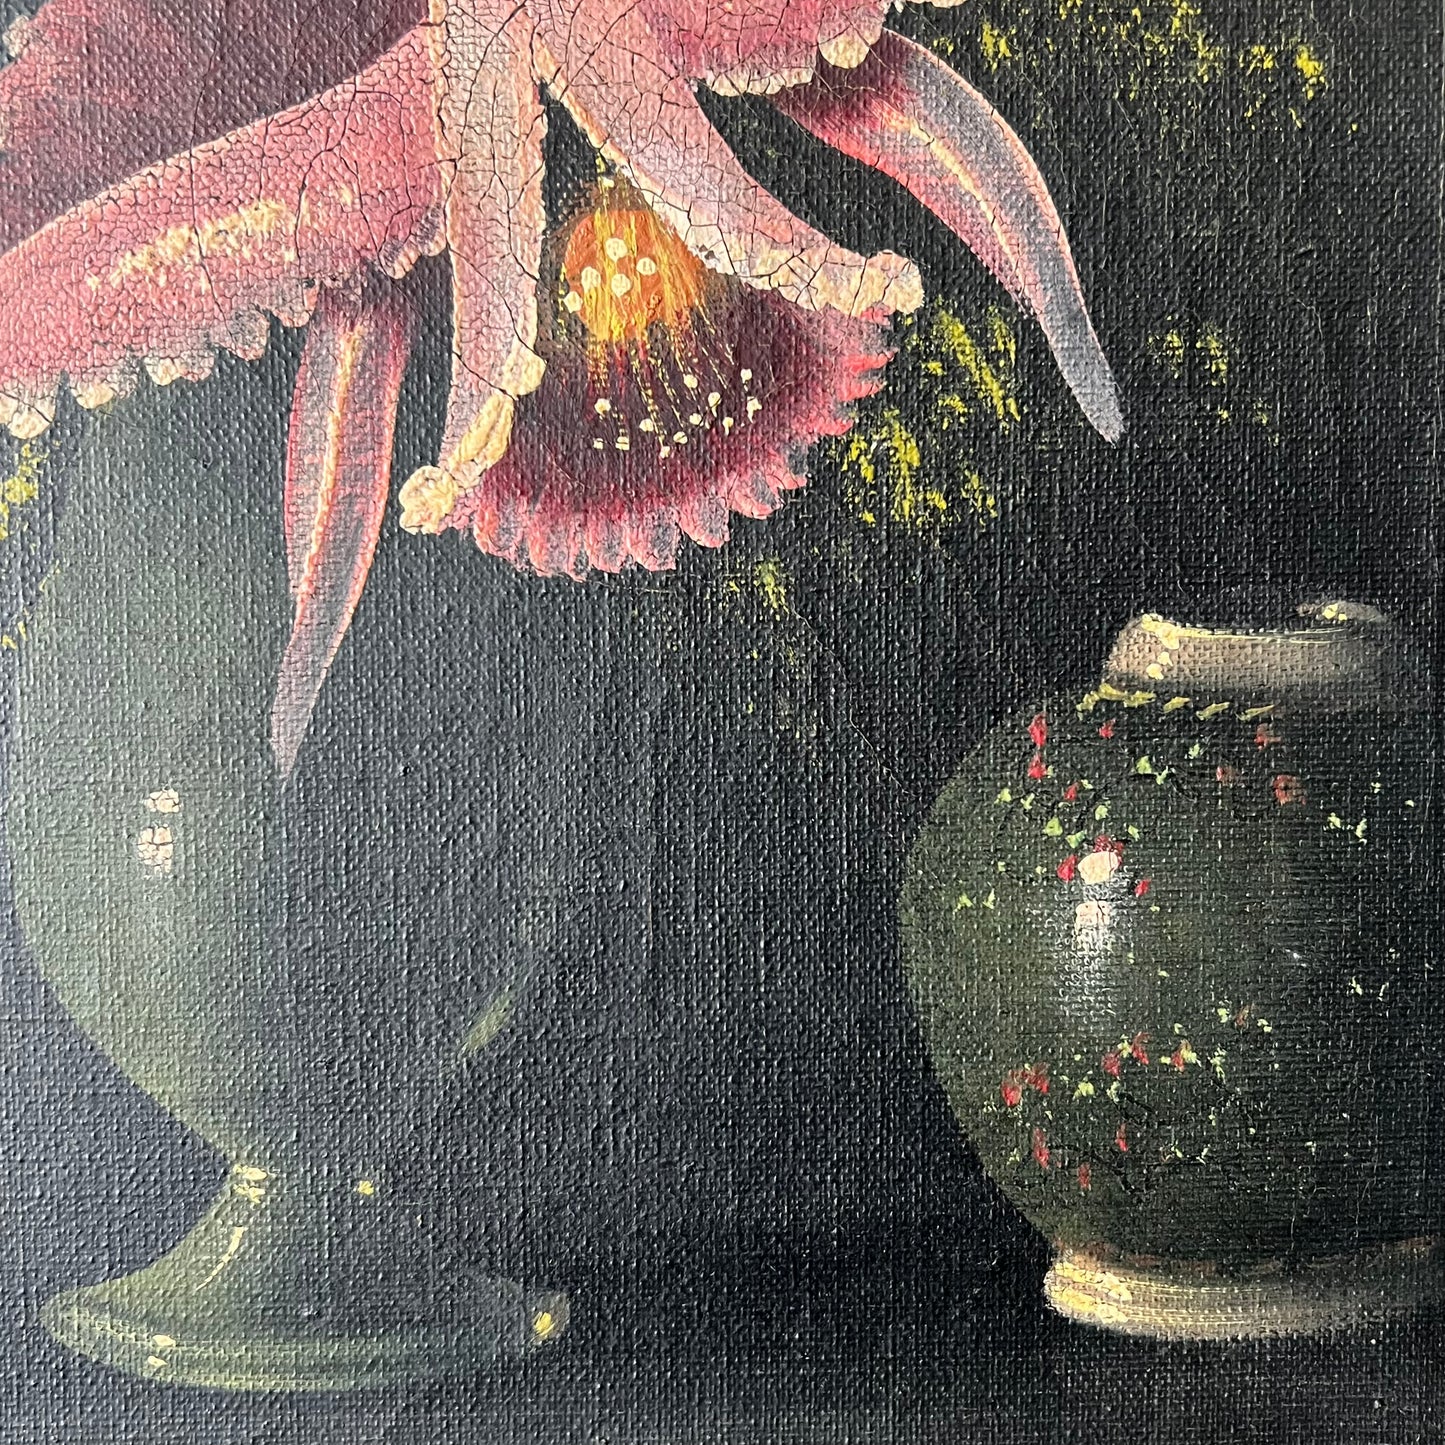 Vintage Oil Painting Still Life of Pink Orchid